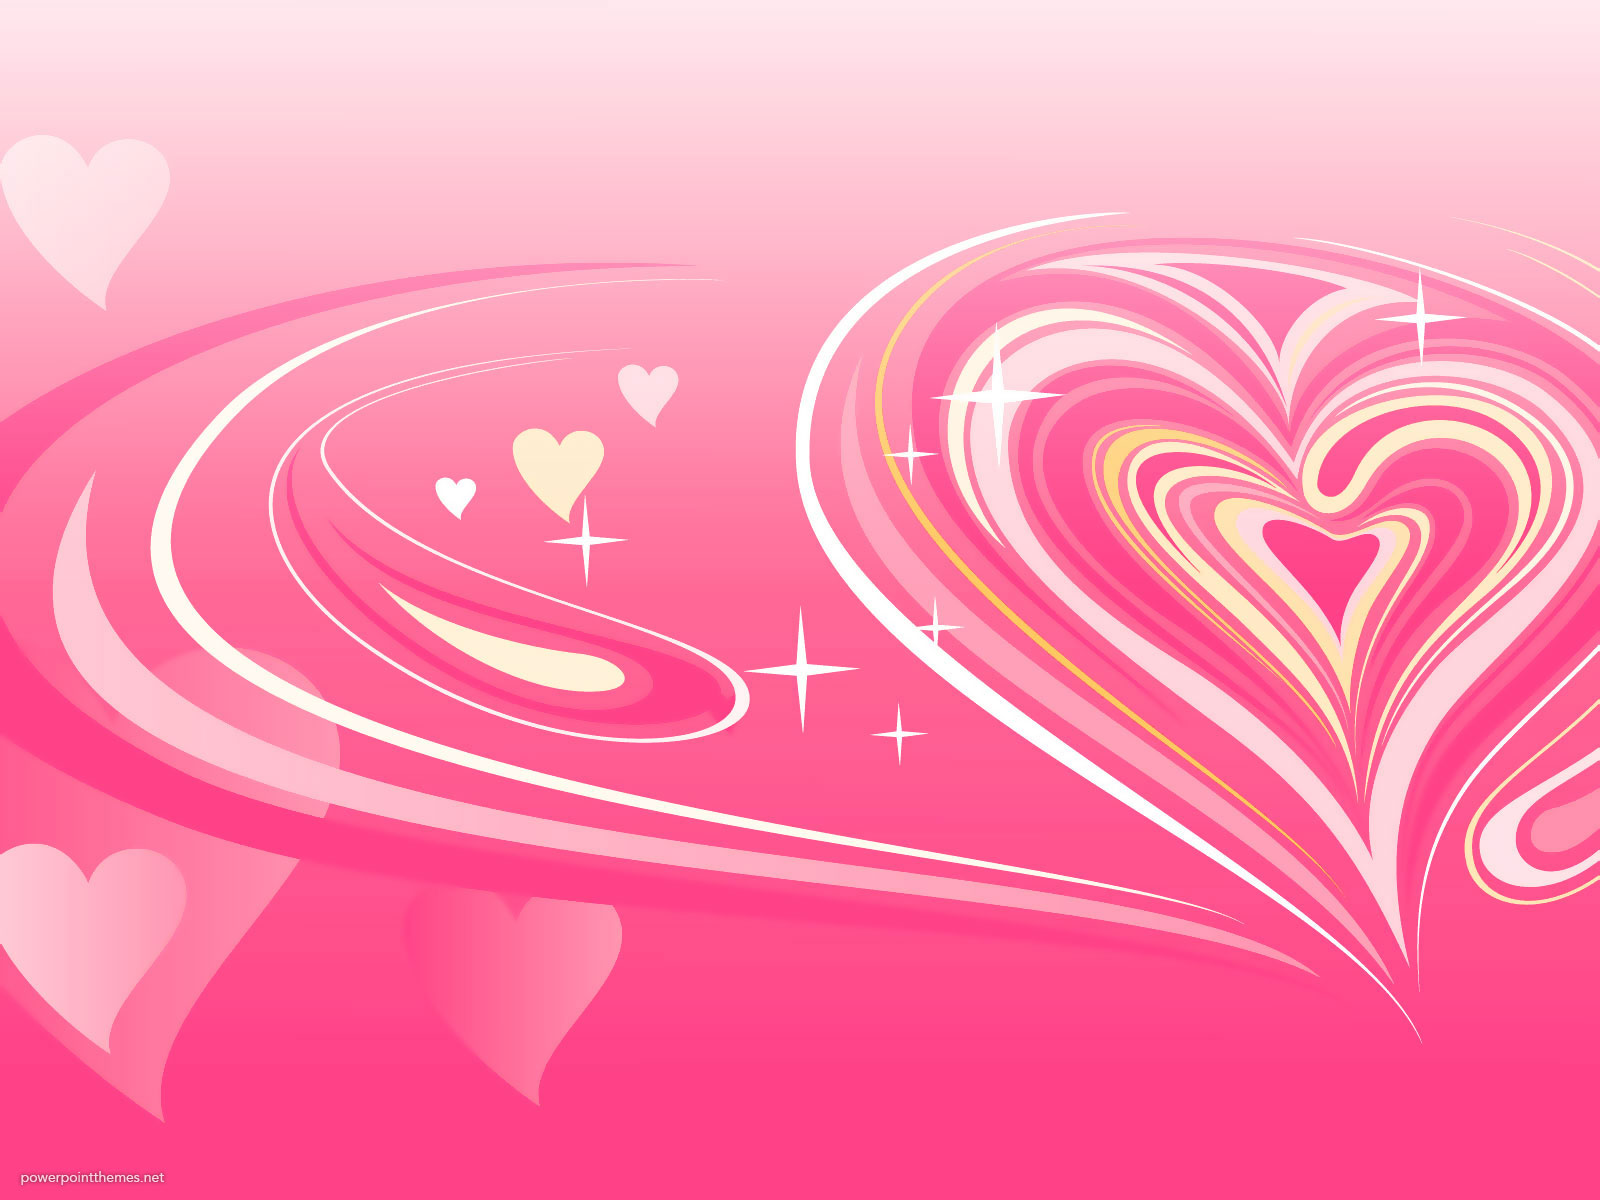 Download Valentines Day For PowerPoint Give A New Look To   Slides